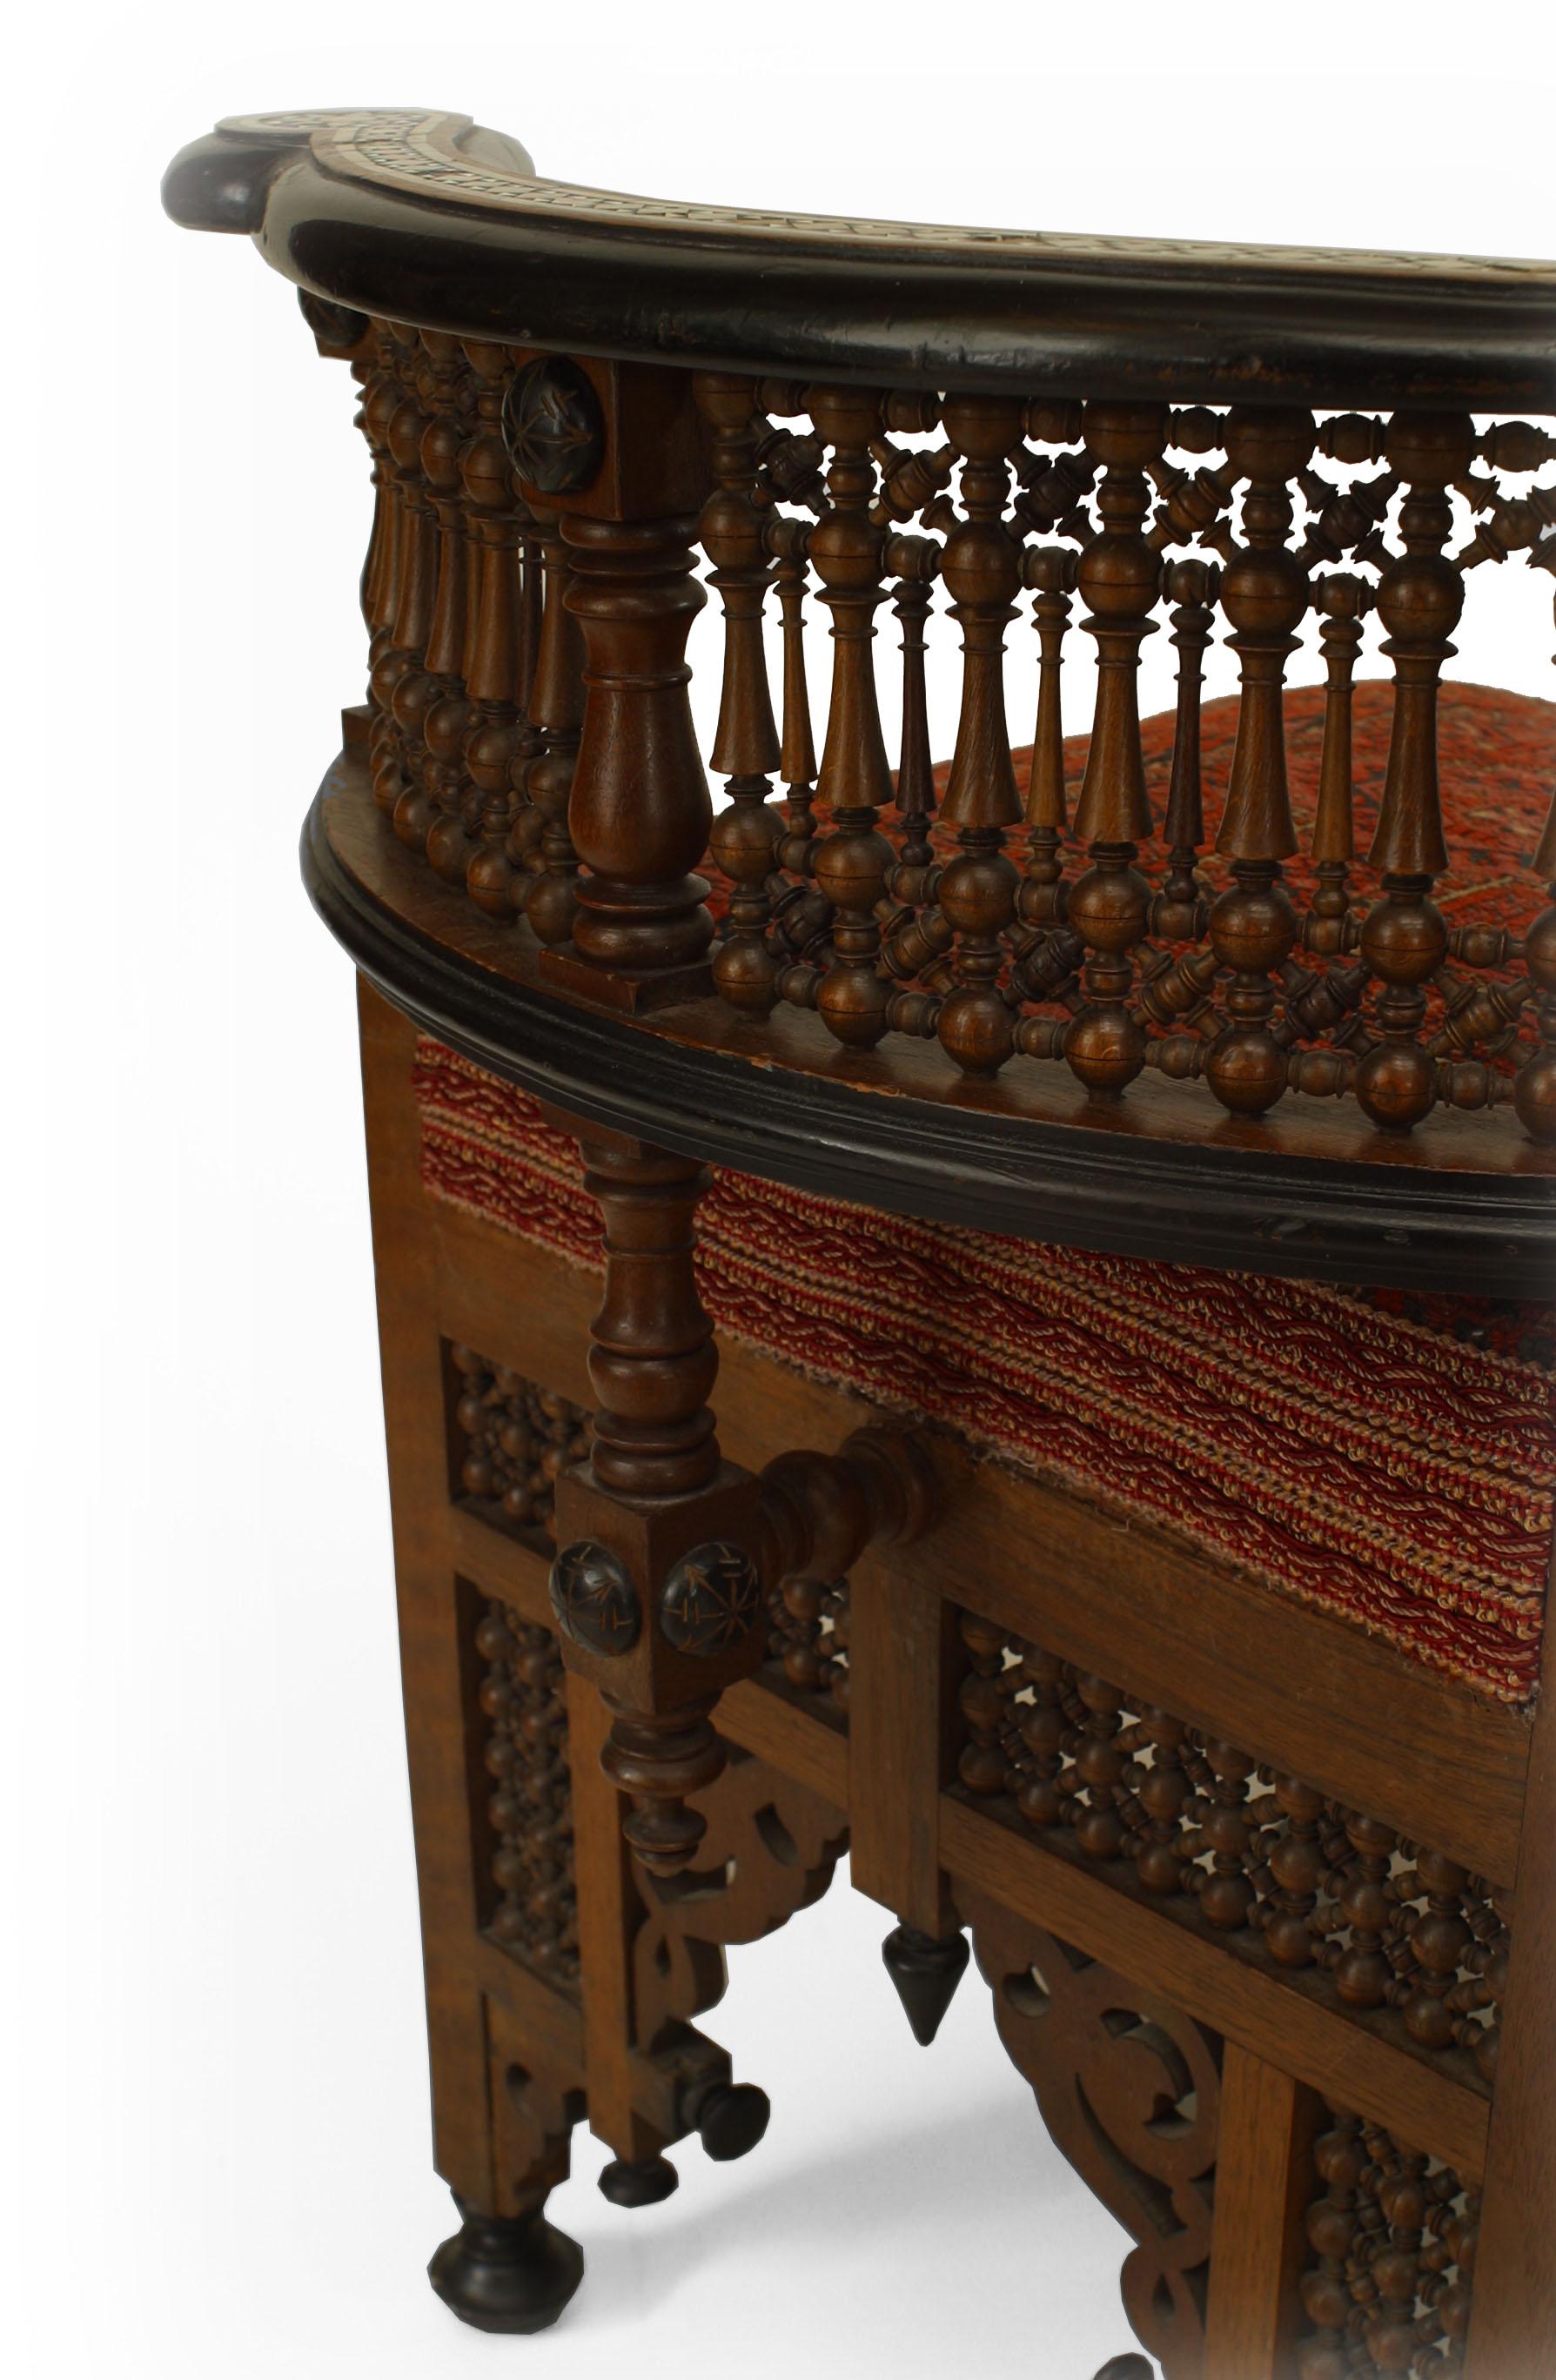 Middle Eastern Moorish style (19th Cent) walnut carved tete-a-tete with ebonized trim and inlaid with mother of pearl and 2 seats upholstered with Persian rug fragments.
   